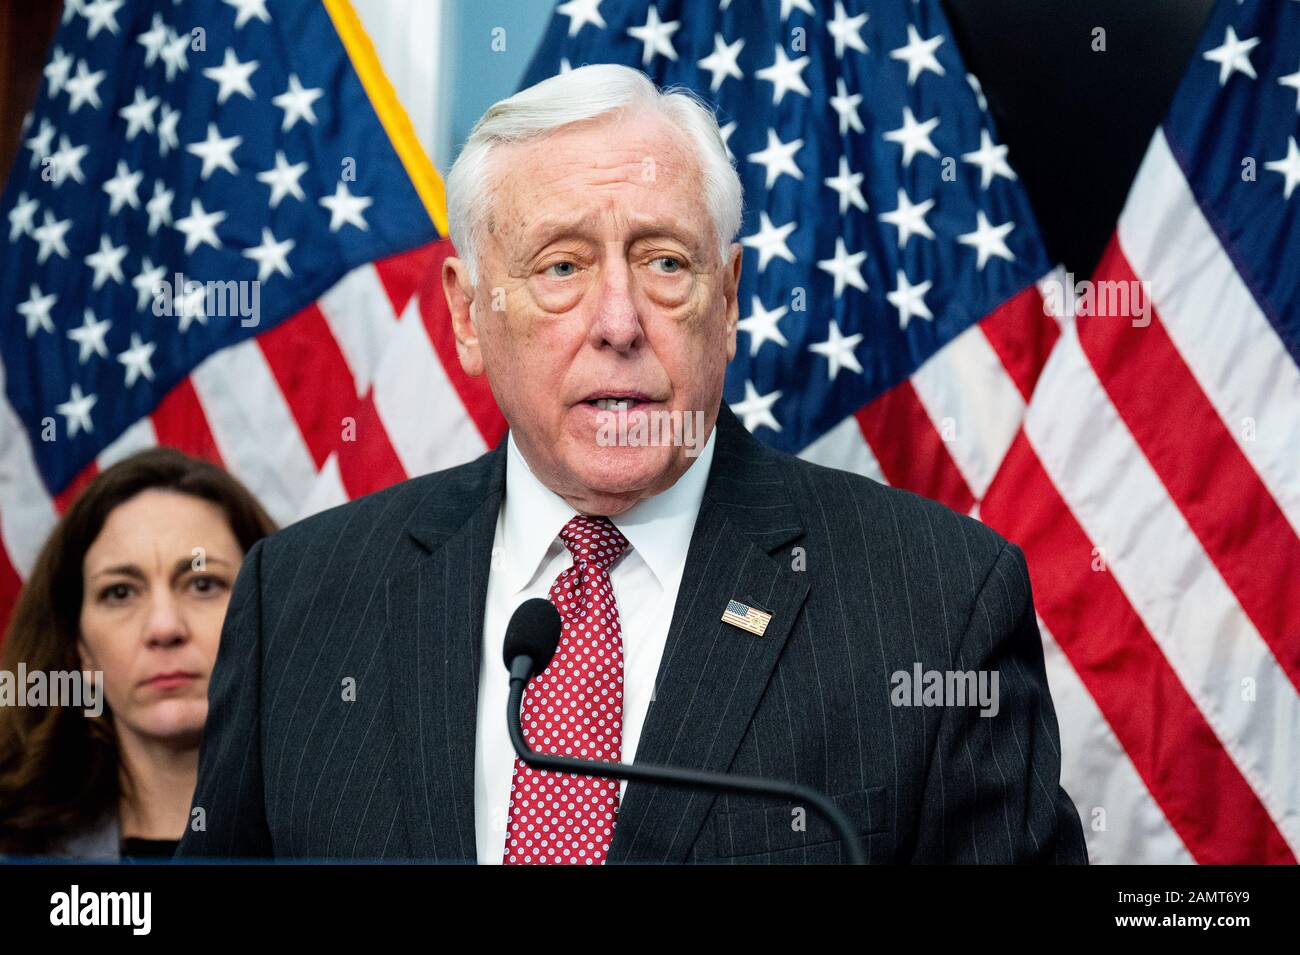 January 14, 2020 - Washington, DC, United States:  U.S. Representative Steny Hoyer (D-MD) speaking at an event for the ten year anniversary of the Citizens United Decision. (Photo by Michael Brochstein/Sipa USA) Stock Photo